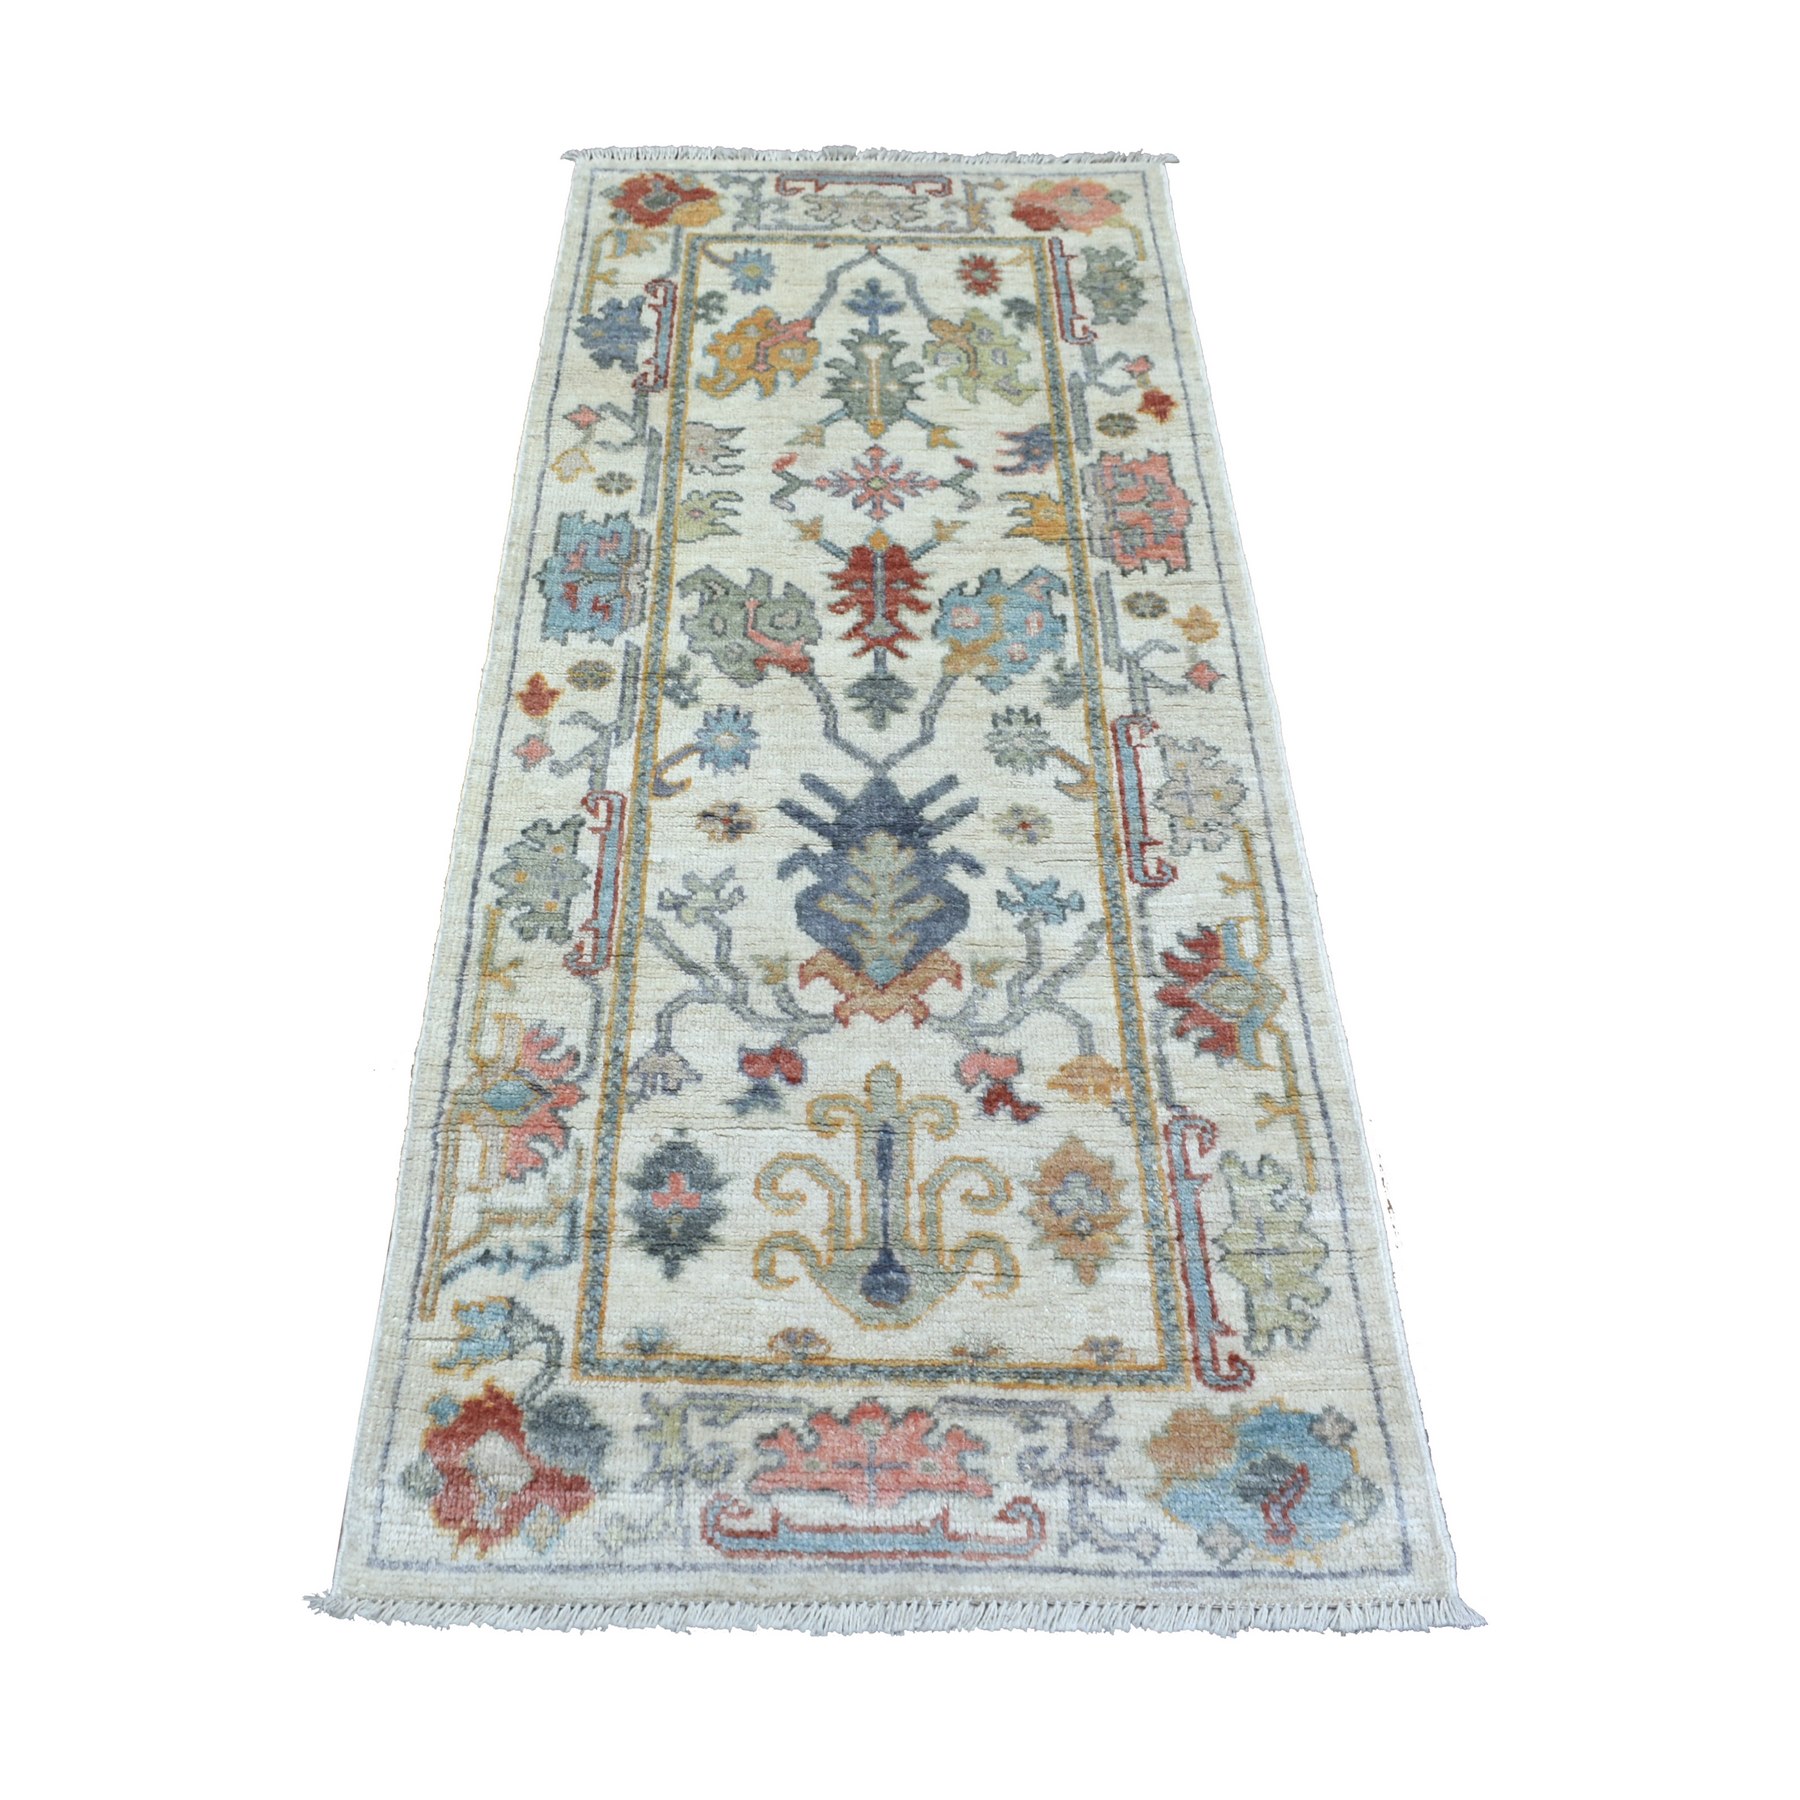 2'5"x5'9" Ivory Angora Oushak With Colorful Leaf Design Natural Dyes, Afghan Wool Hand Woven Runner Oriental Rug 